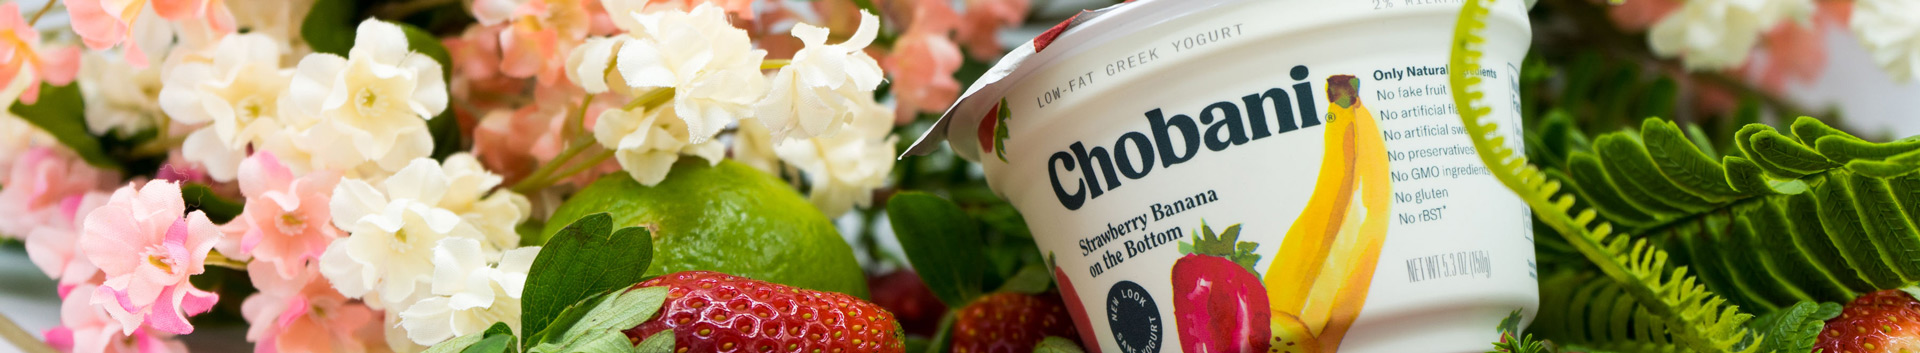 A cup of strawberry banana Chobani yogurt sitting in a bed of fruit, flowers and shrubbery.